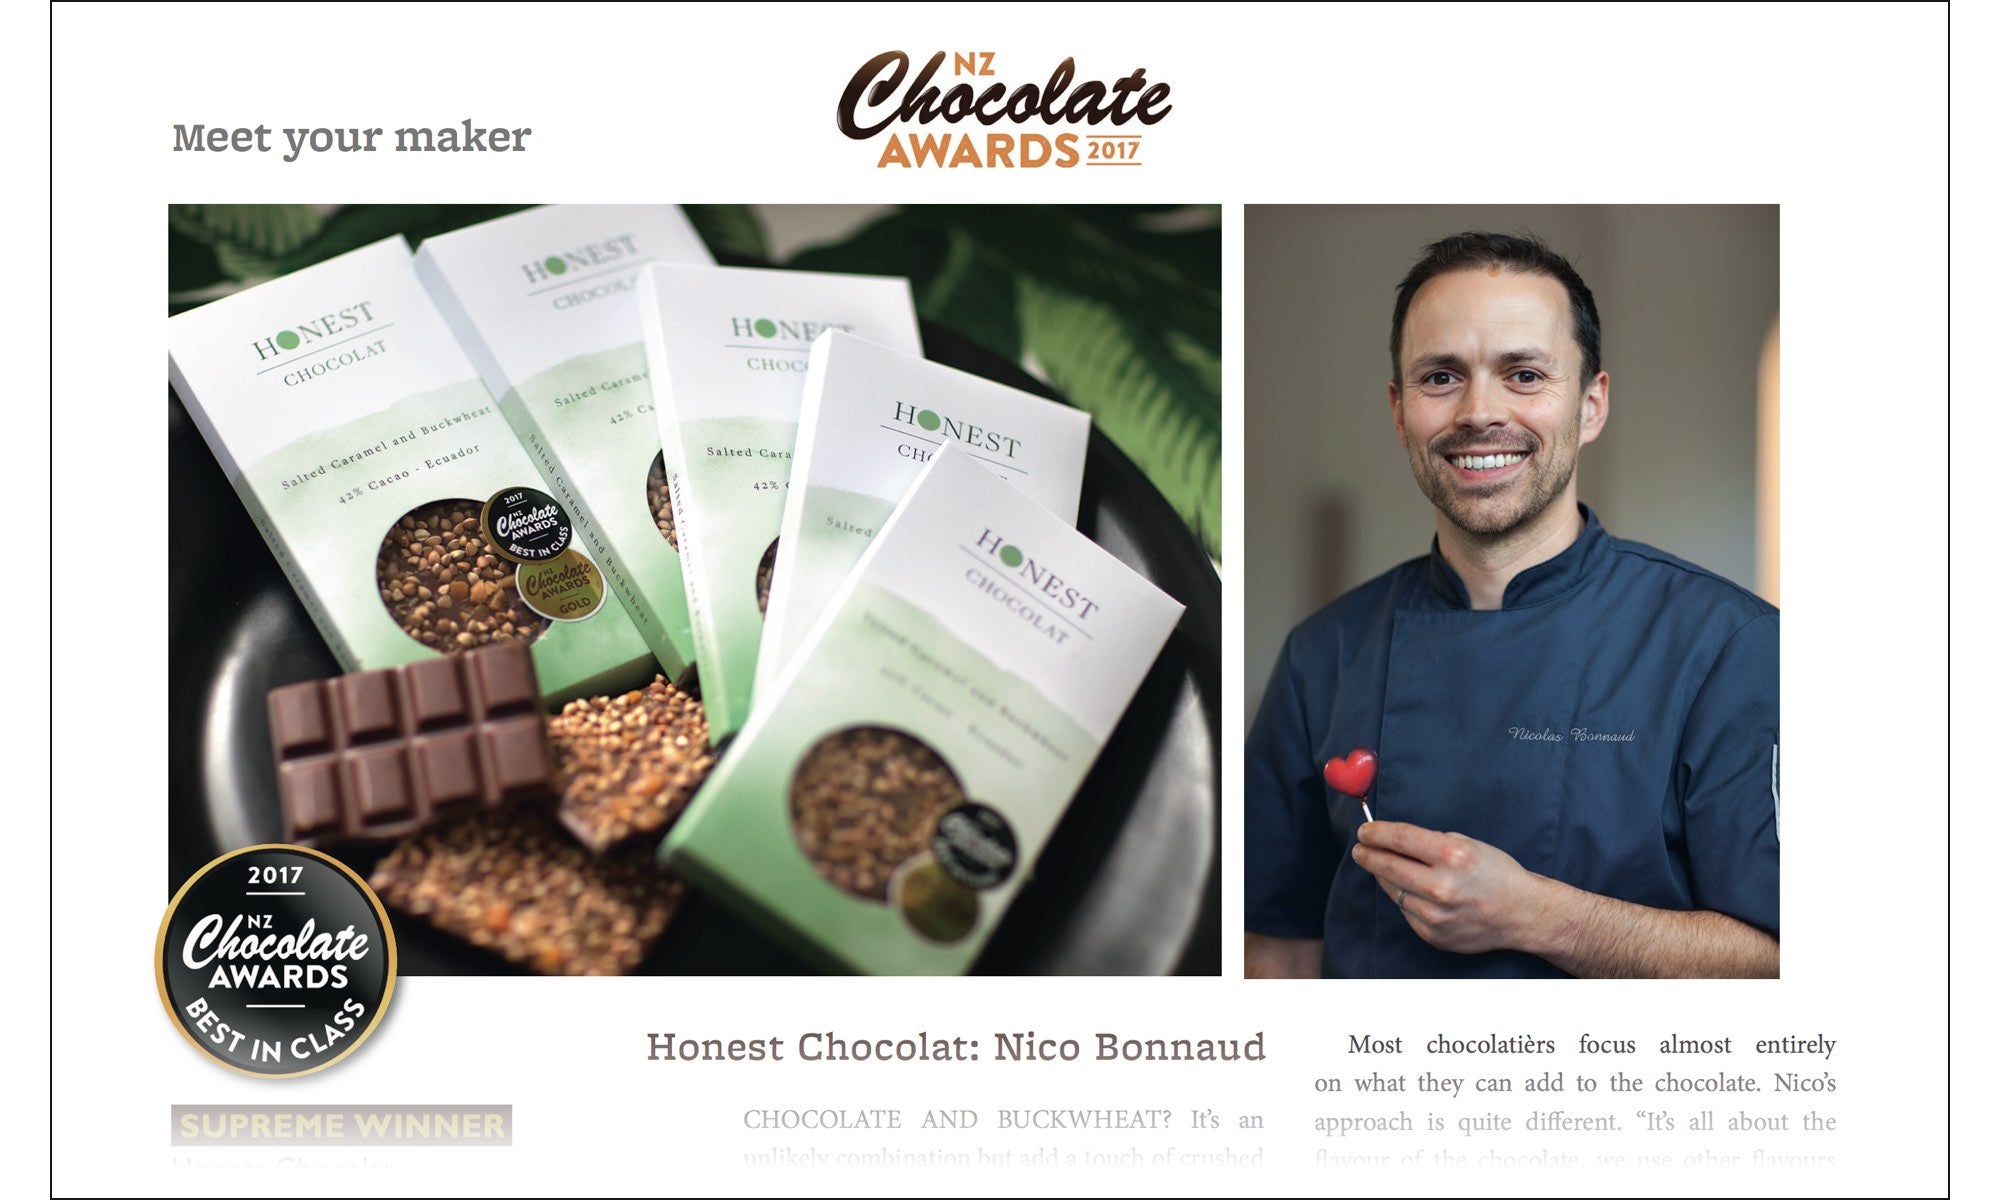 Article about Honest Chocolat